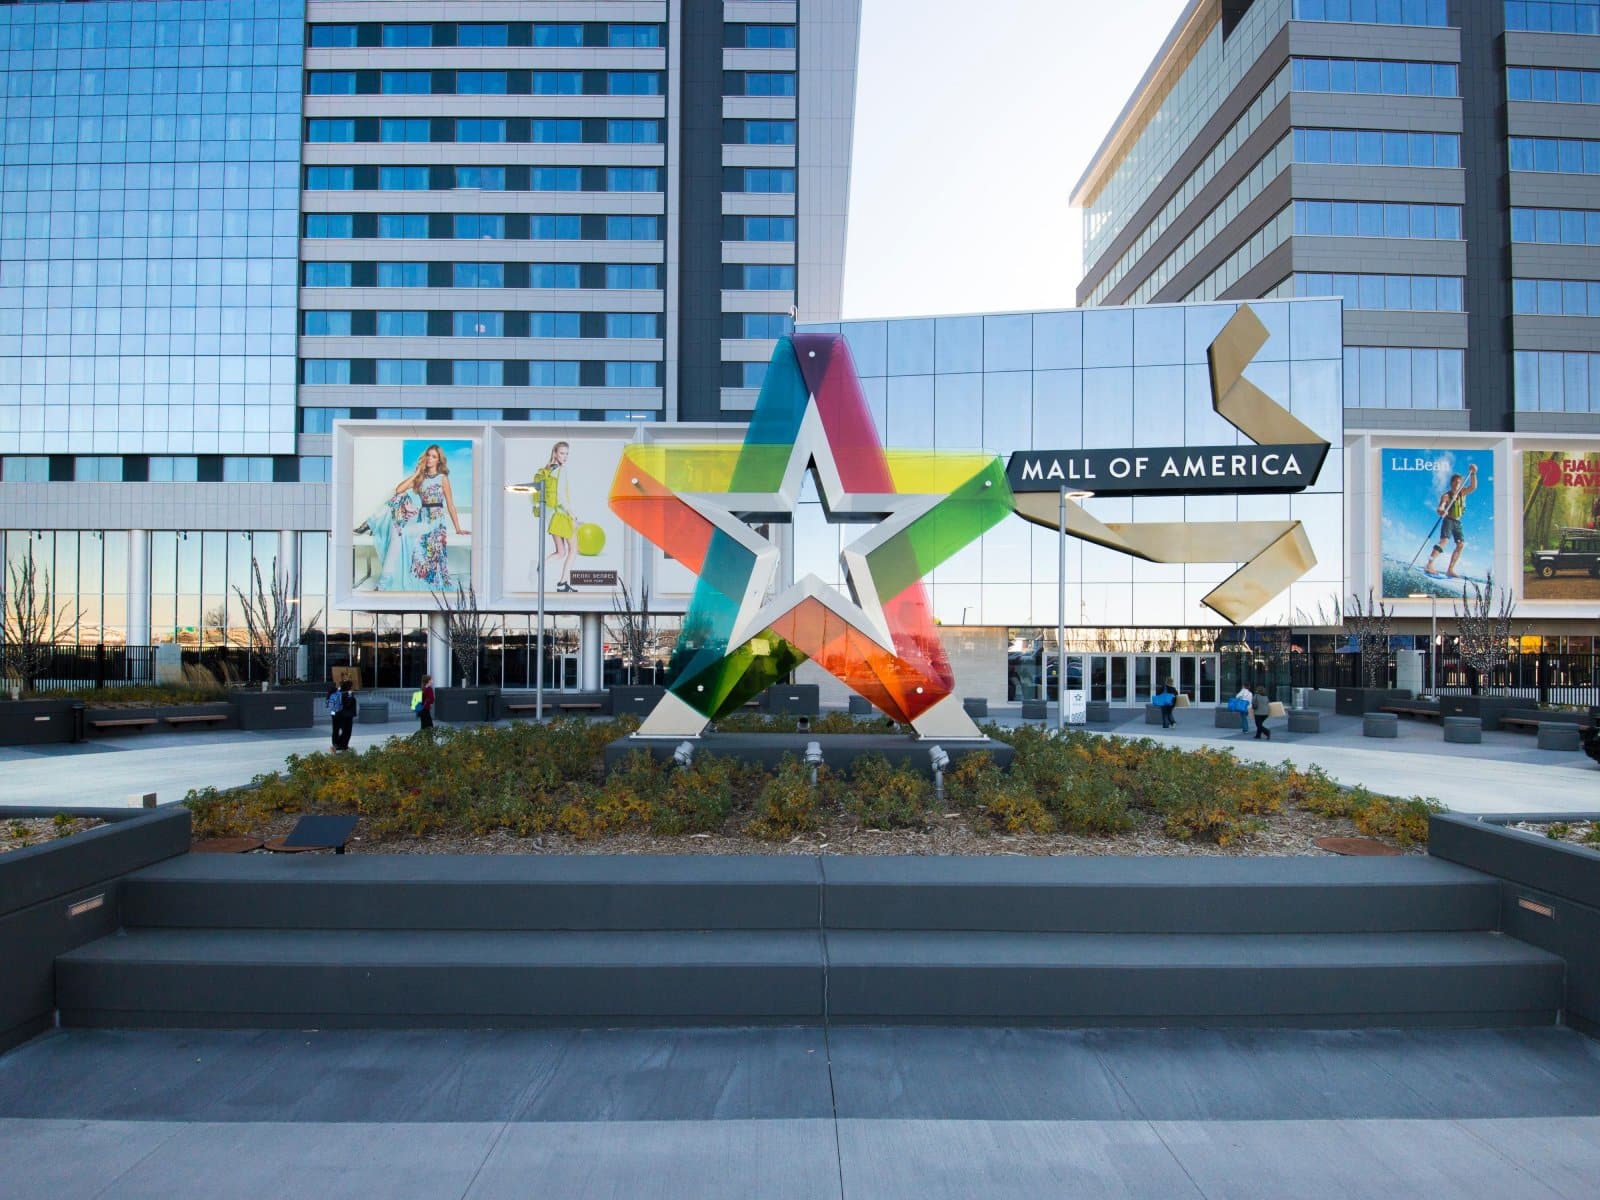 <p>Minnesota’s mix of natural beauty and the Mall of America brings in about $16 billion in tourism revenue. While the mall itself is free to explore, attractions within it, such as the Nickelodeon Universe, charge admission fees.</p>